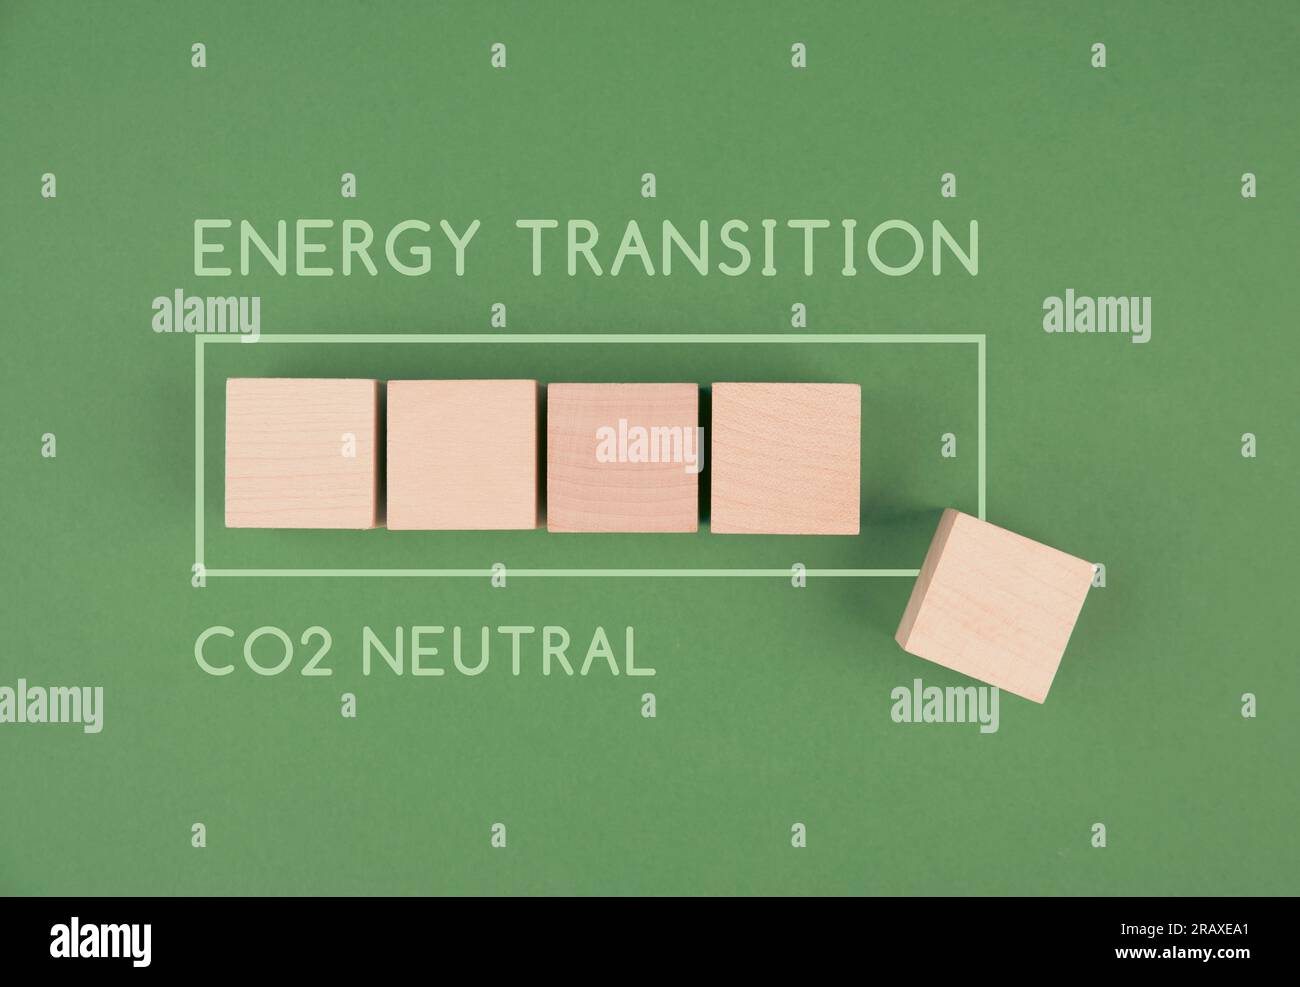 Energy transition, CO2 neutral loading bar, reduce carbon emission footprint, sustainable renewable electricity , environment protection, eco lifestyl Stock Photo